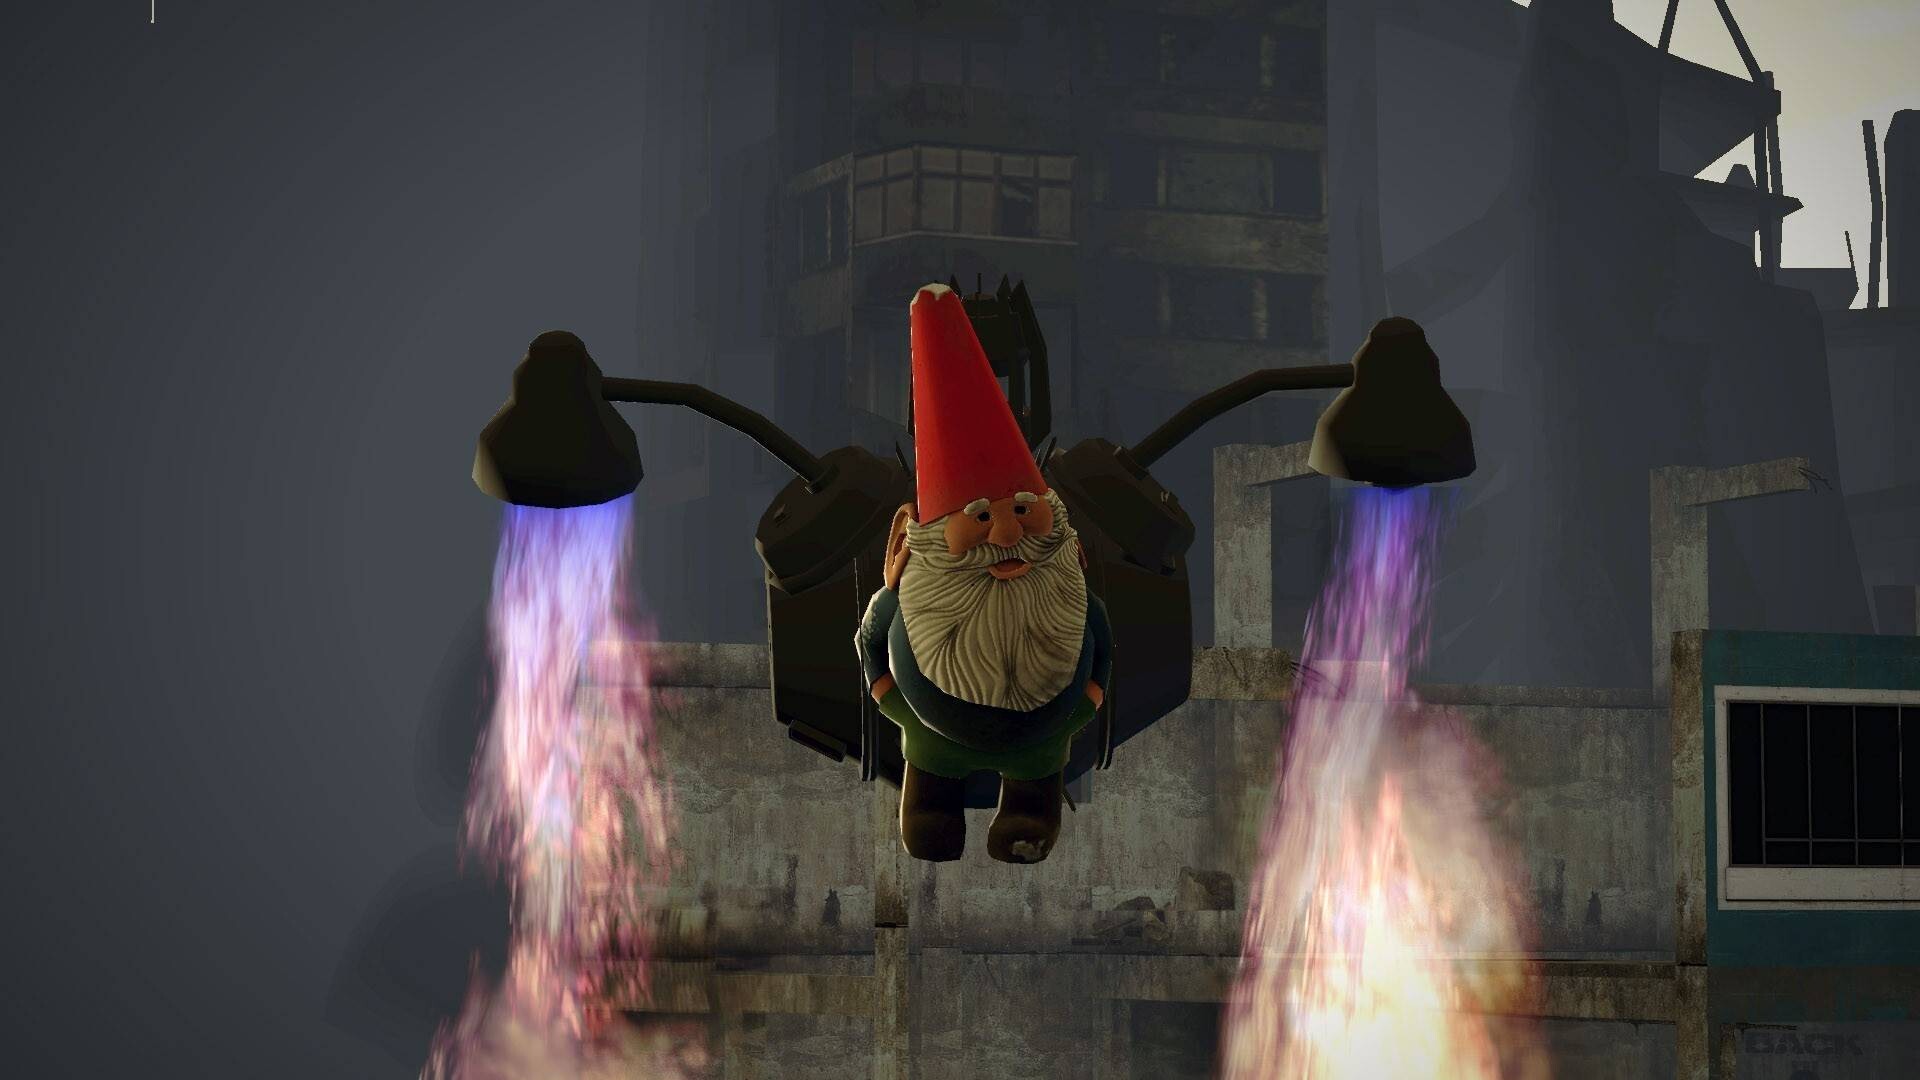 Garry's Mod: Gnome Chompski, The famous Garden Gnome in HL2: Ep2 and Half-Life: Alyx, Part of an achievement. 1920x1080 Full HD Wallpaper.